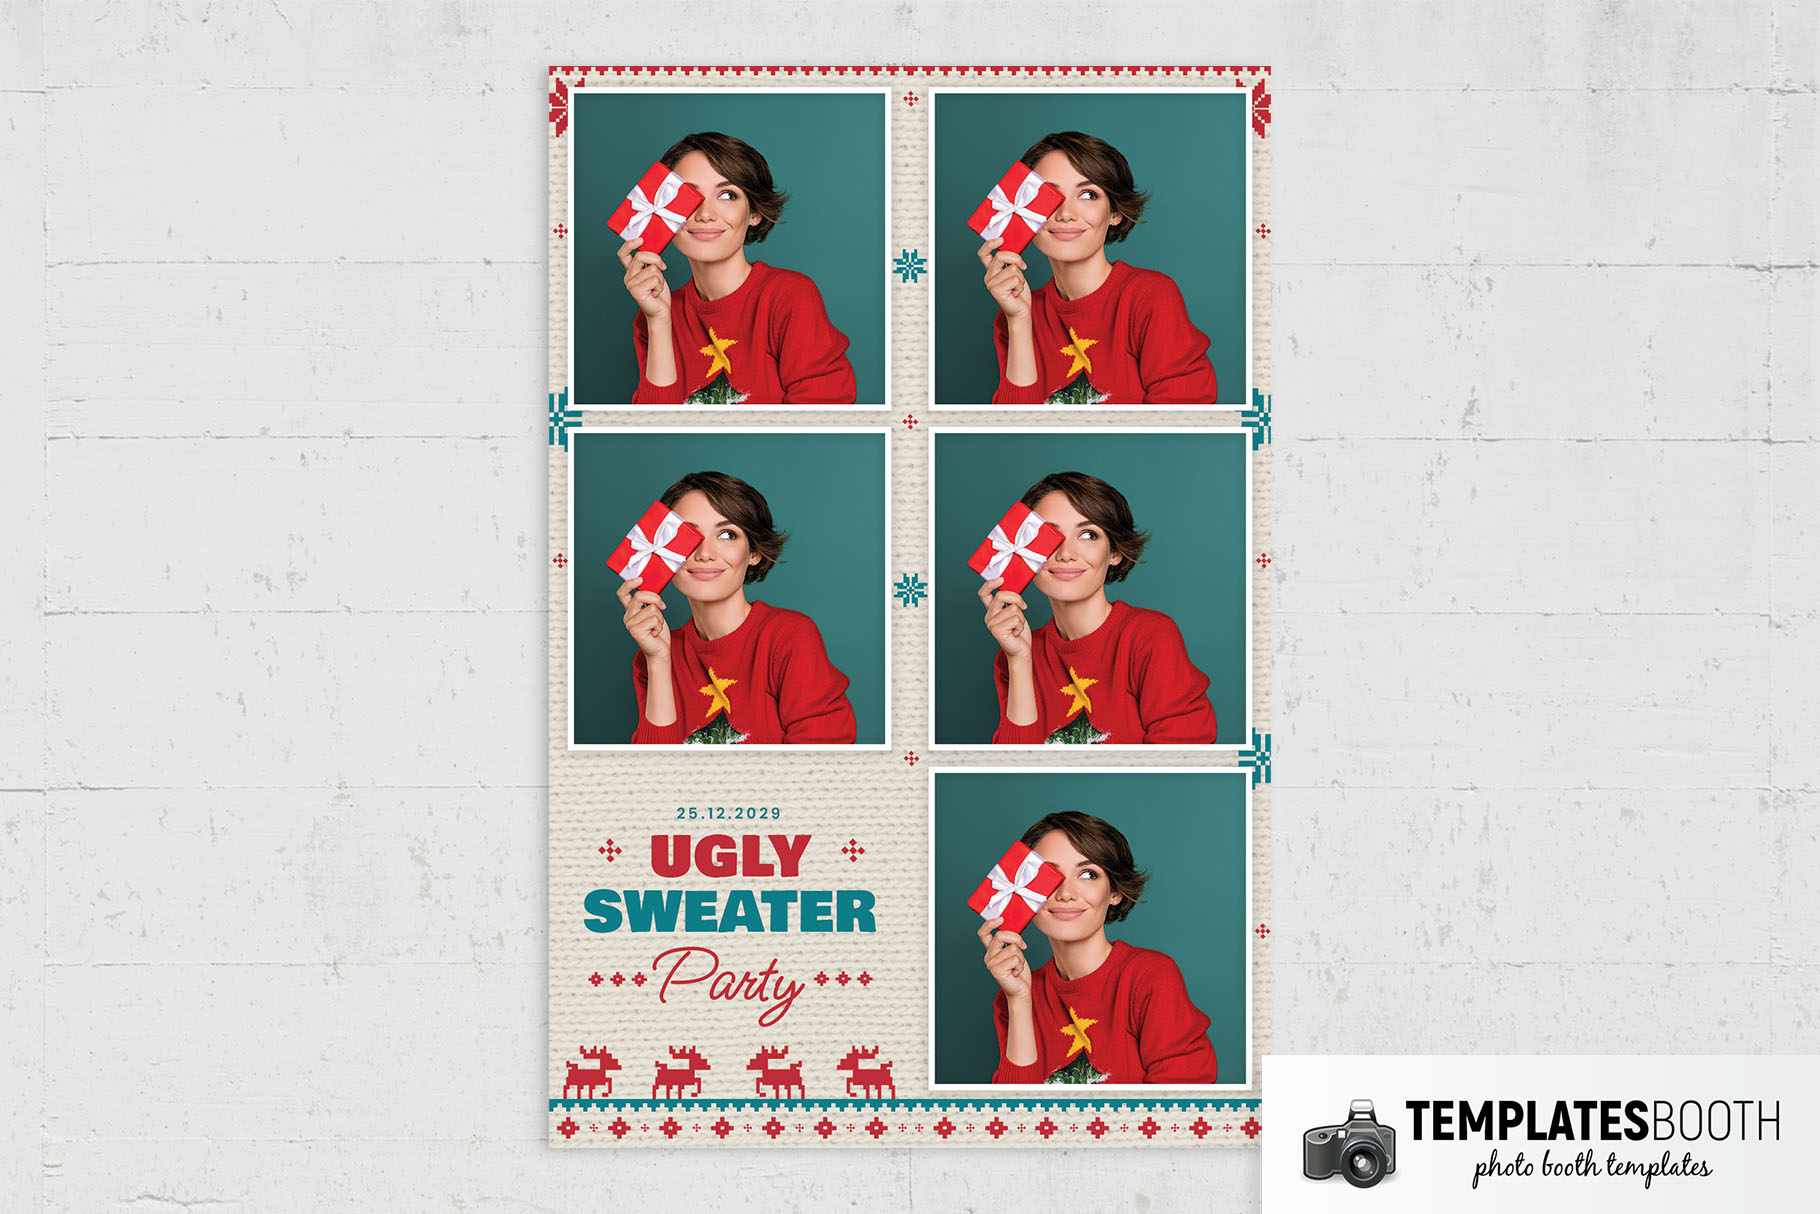 Free Ugly Christmas Sweater Photo Booth Template